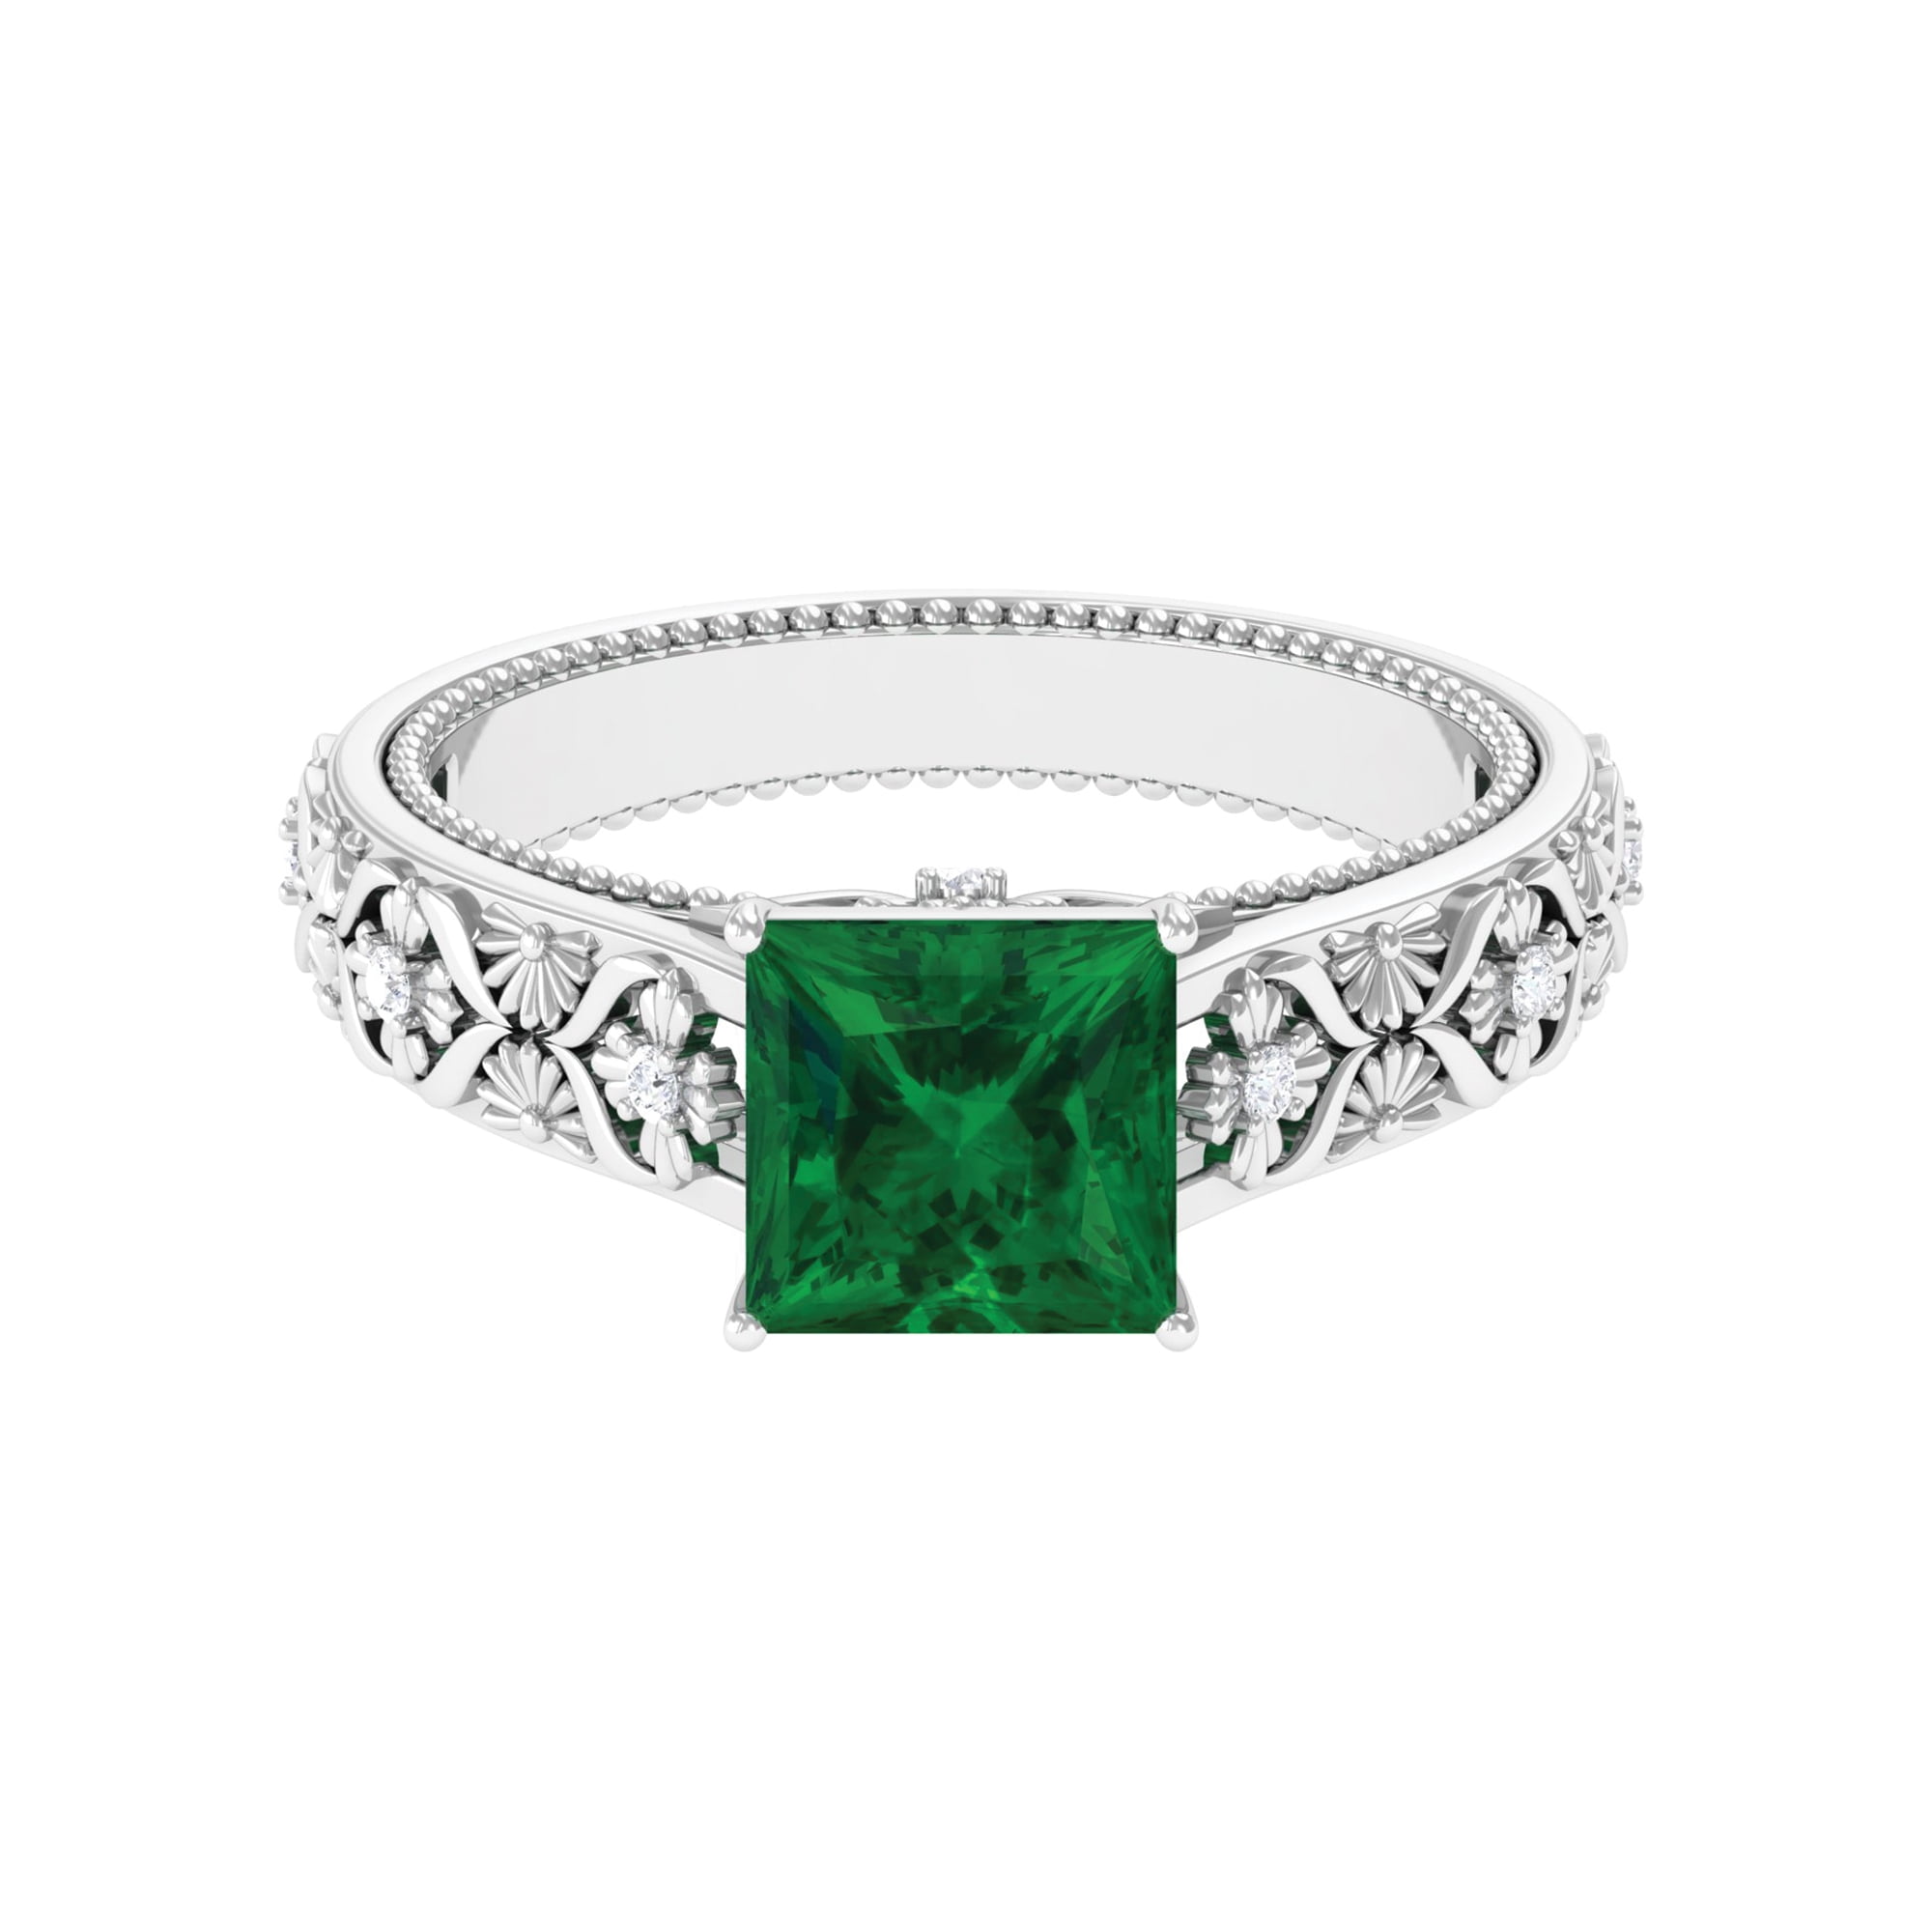 1 ct Princess Cut Created Green Opal Solitaire Ring in Sterling